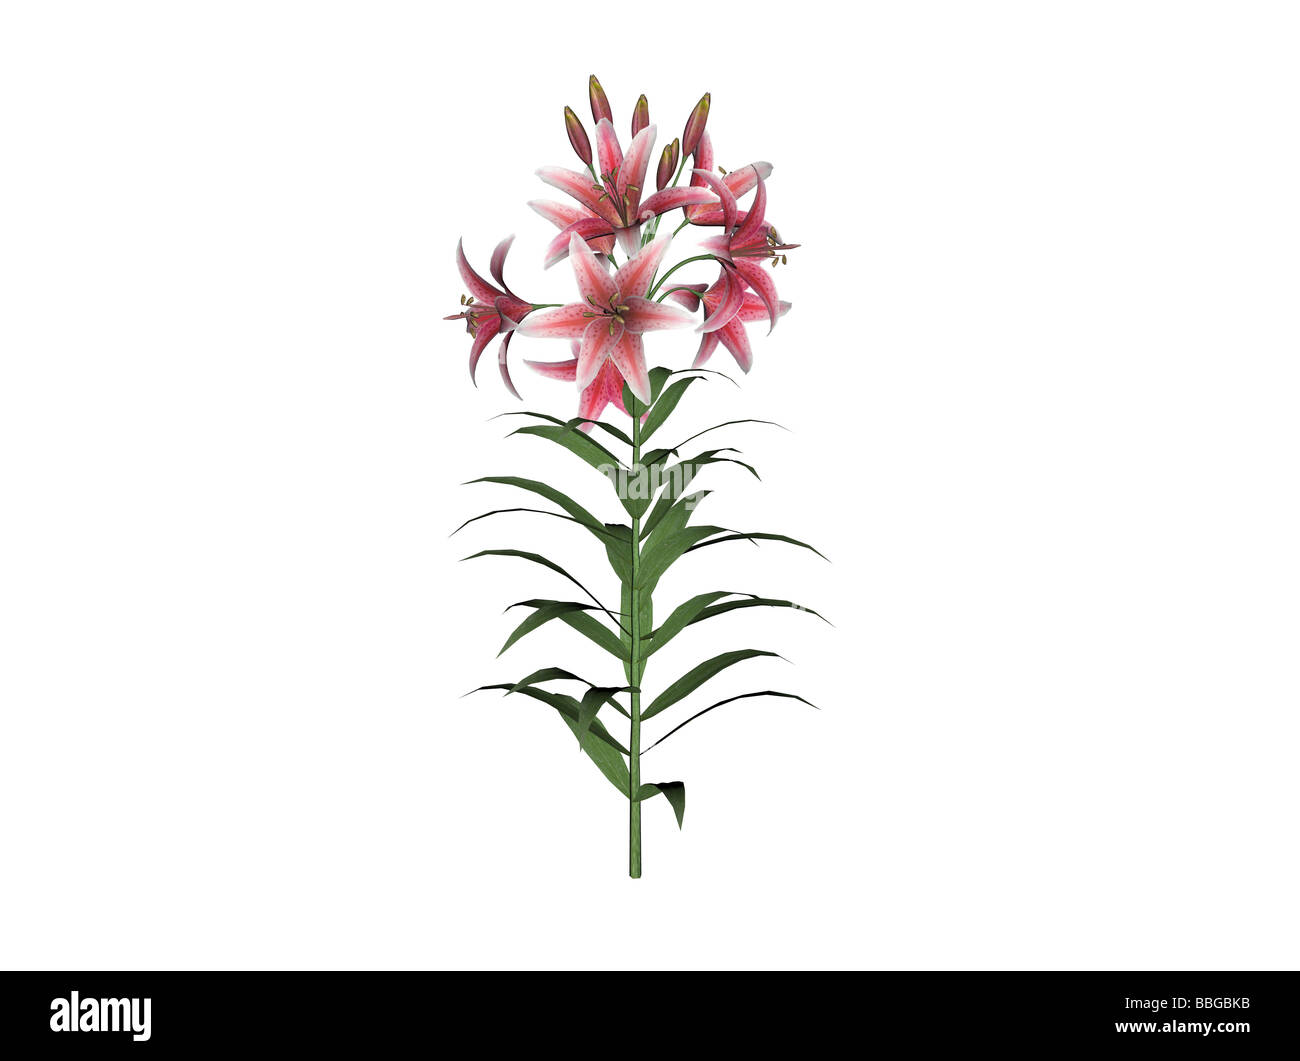 Illustration of an asiatic lily raytraced image Stock Photo